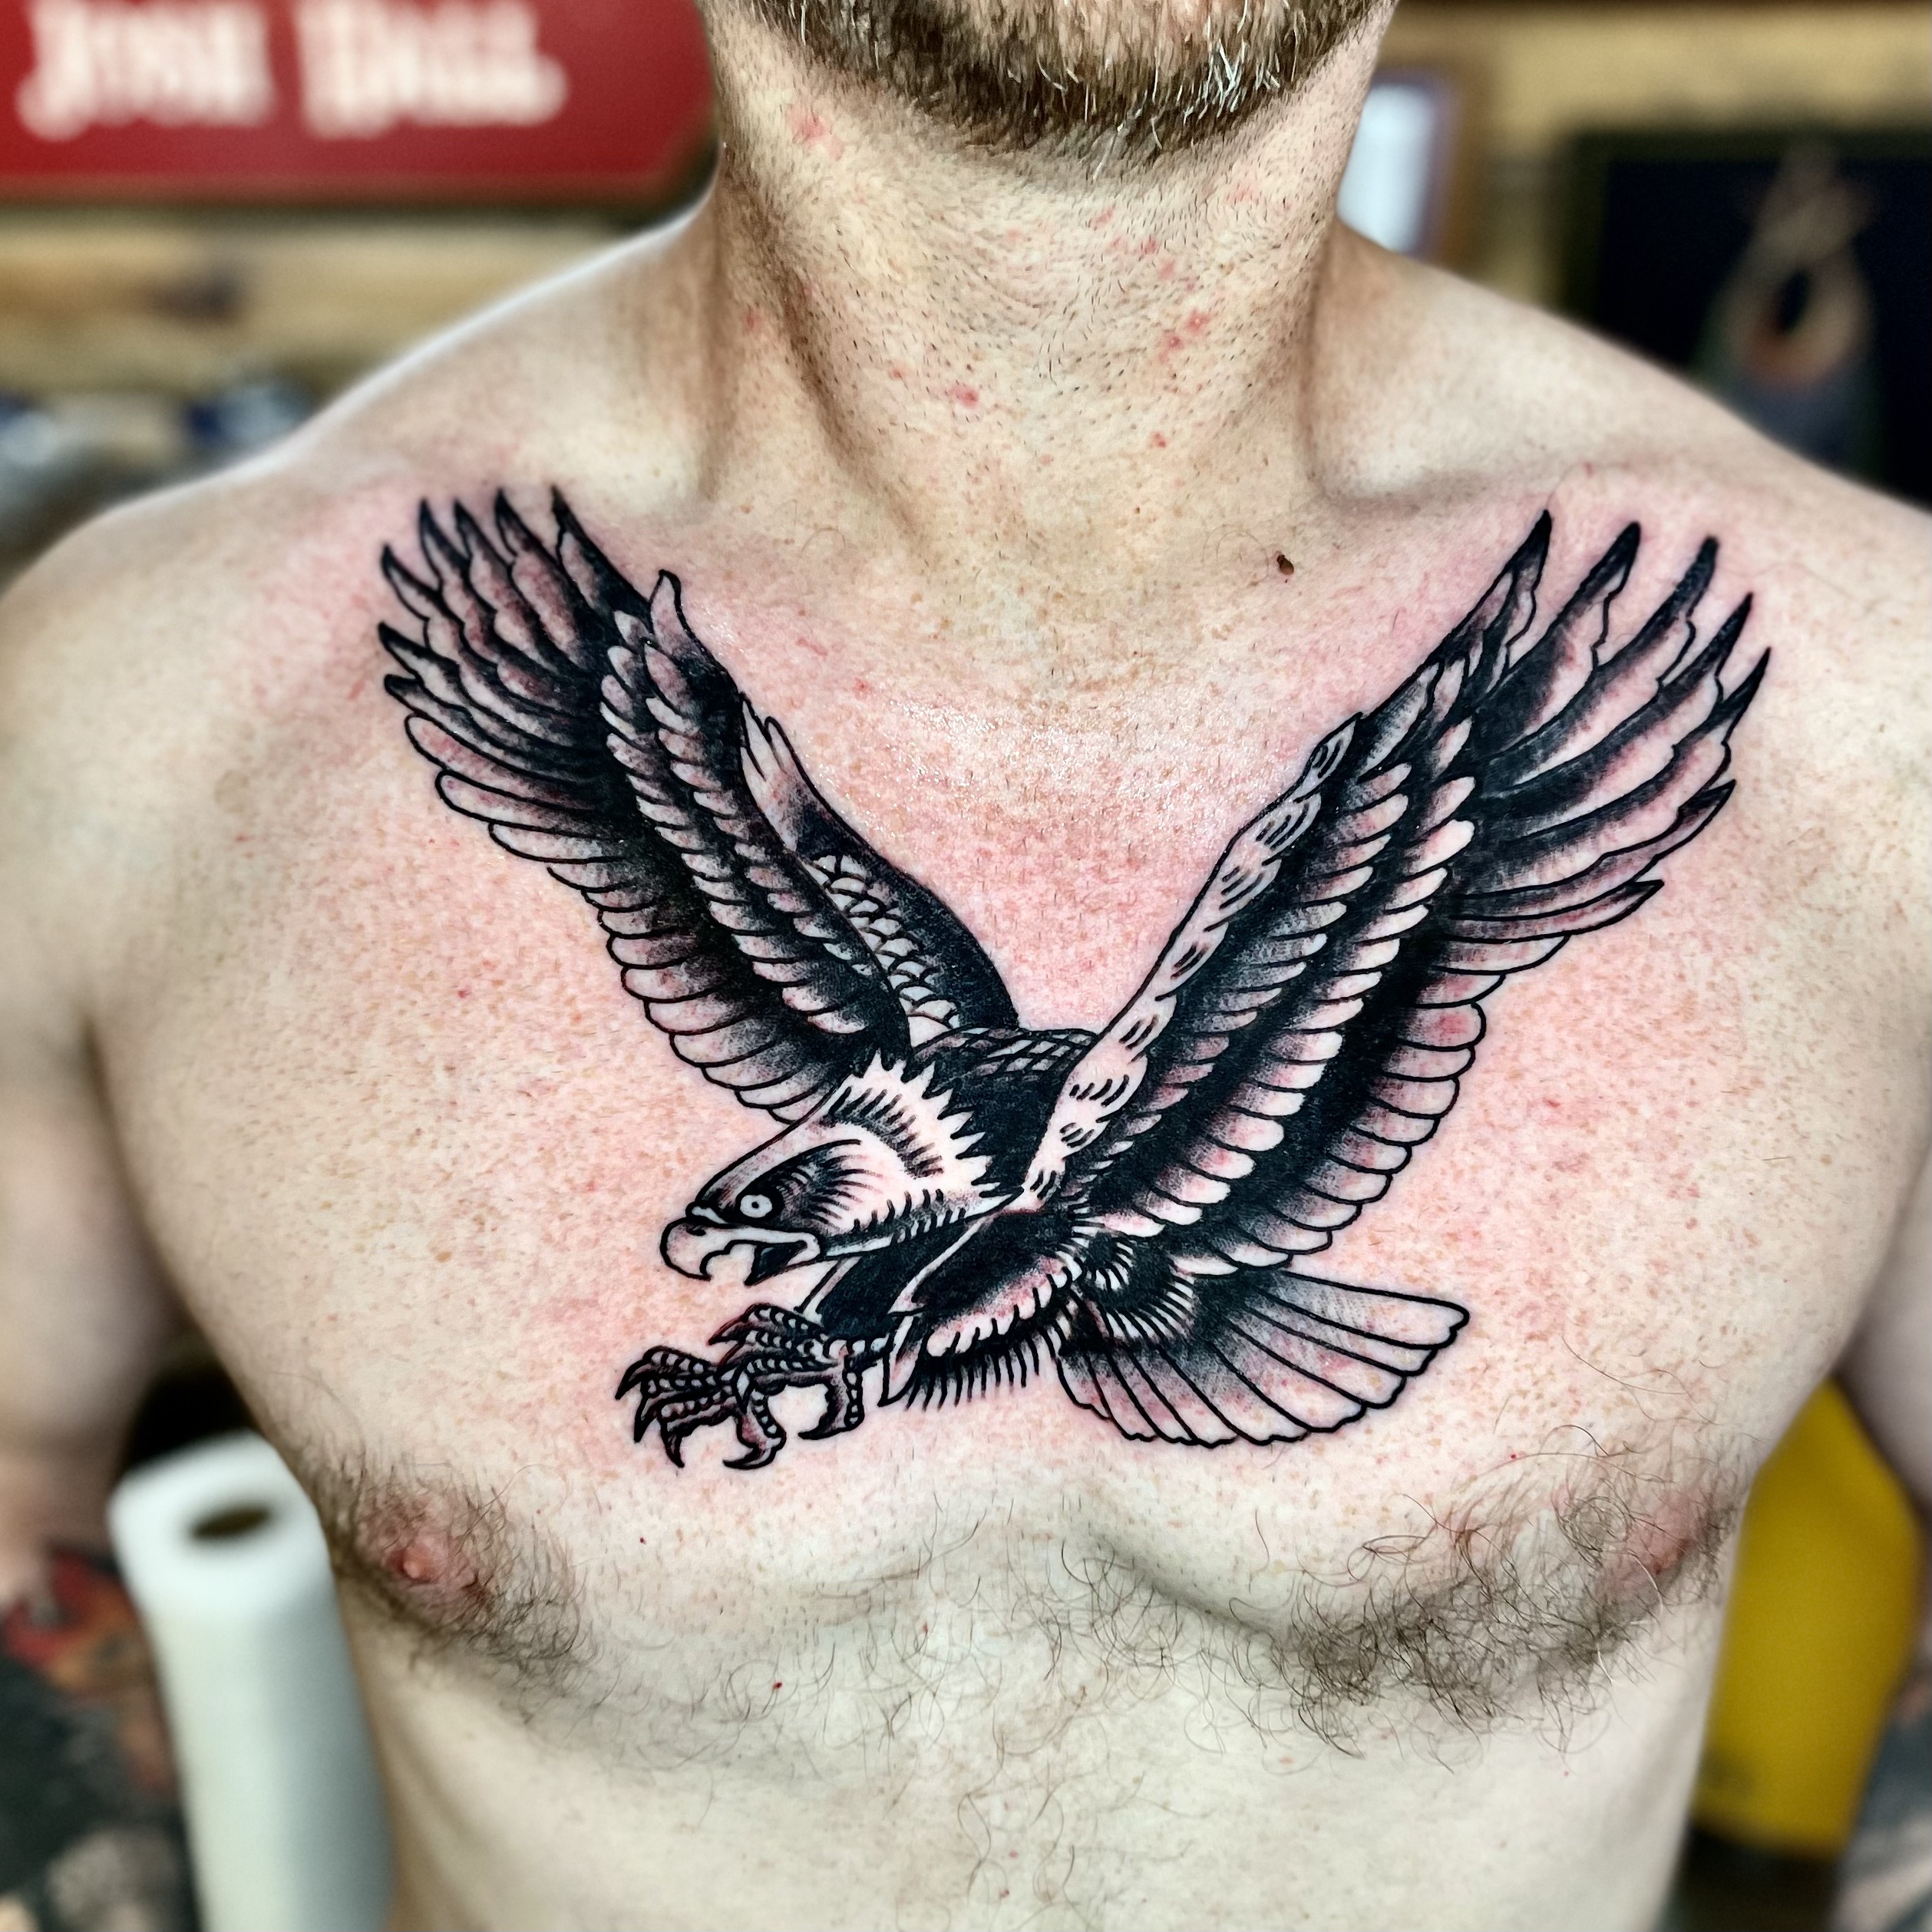 Large eagle tattoo on a man's chest